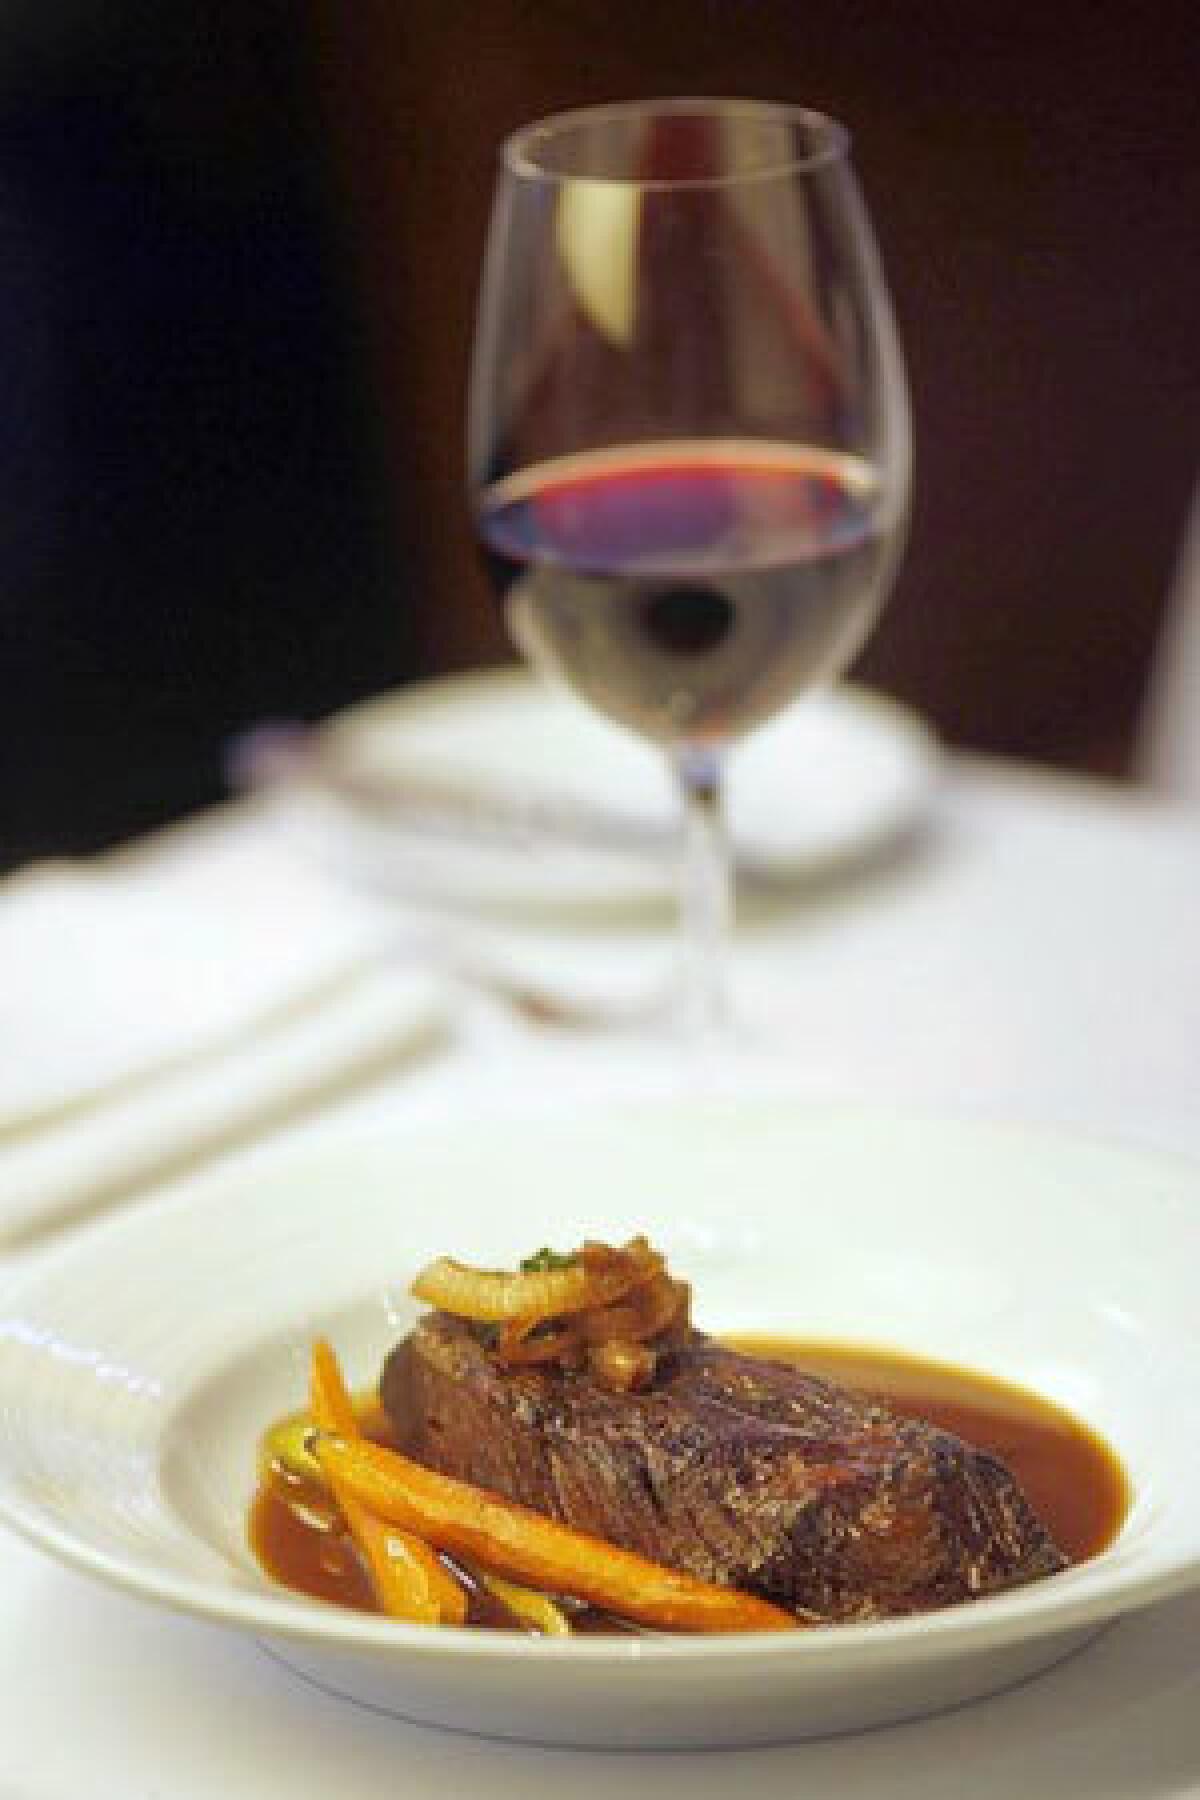 Braised pot roast is made with boned short rib at Suzanne Tracht's Jar.